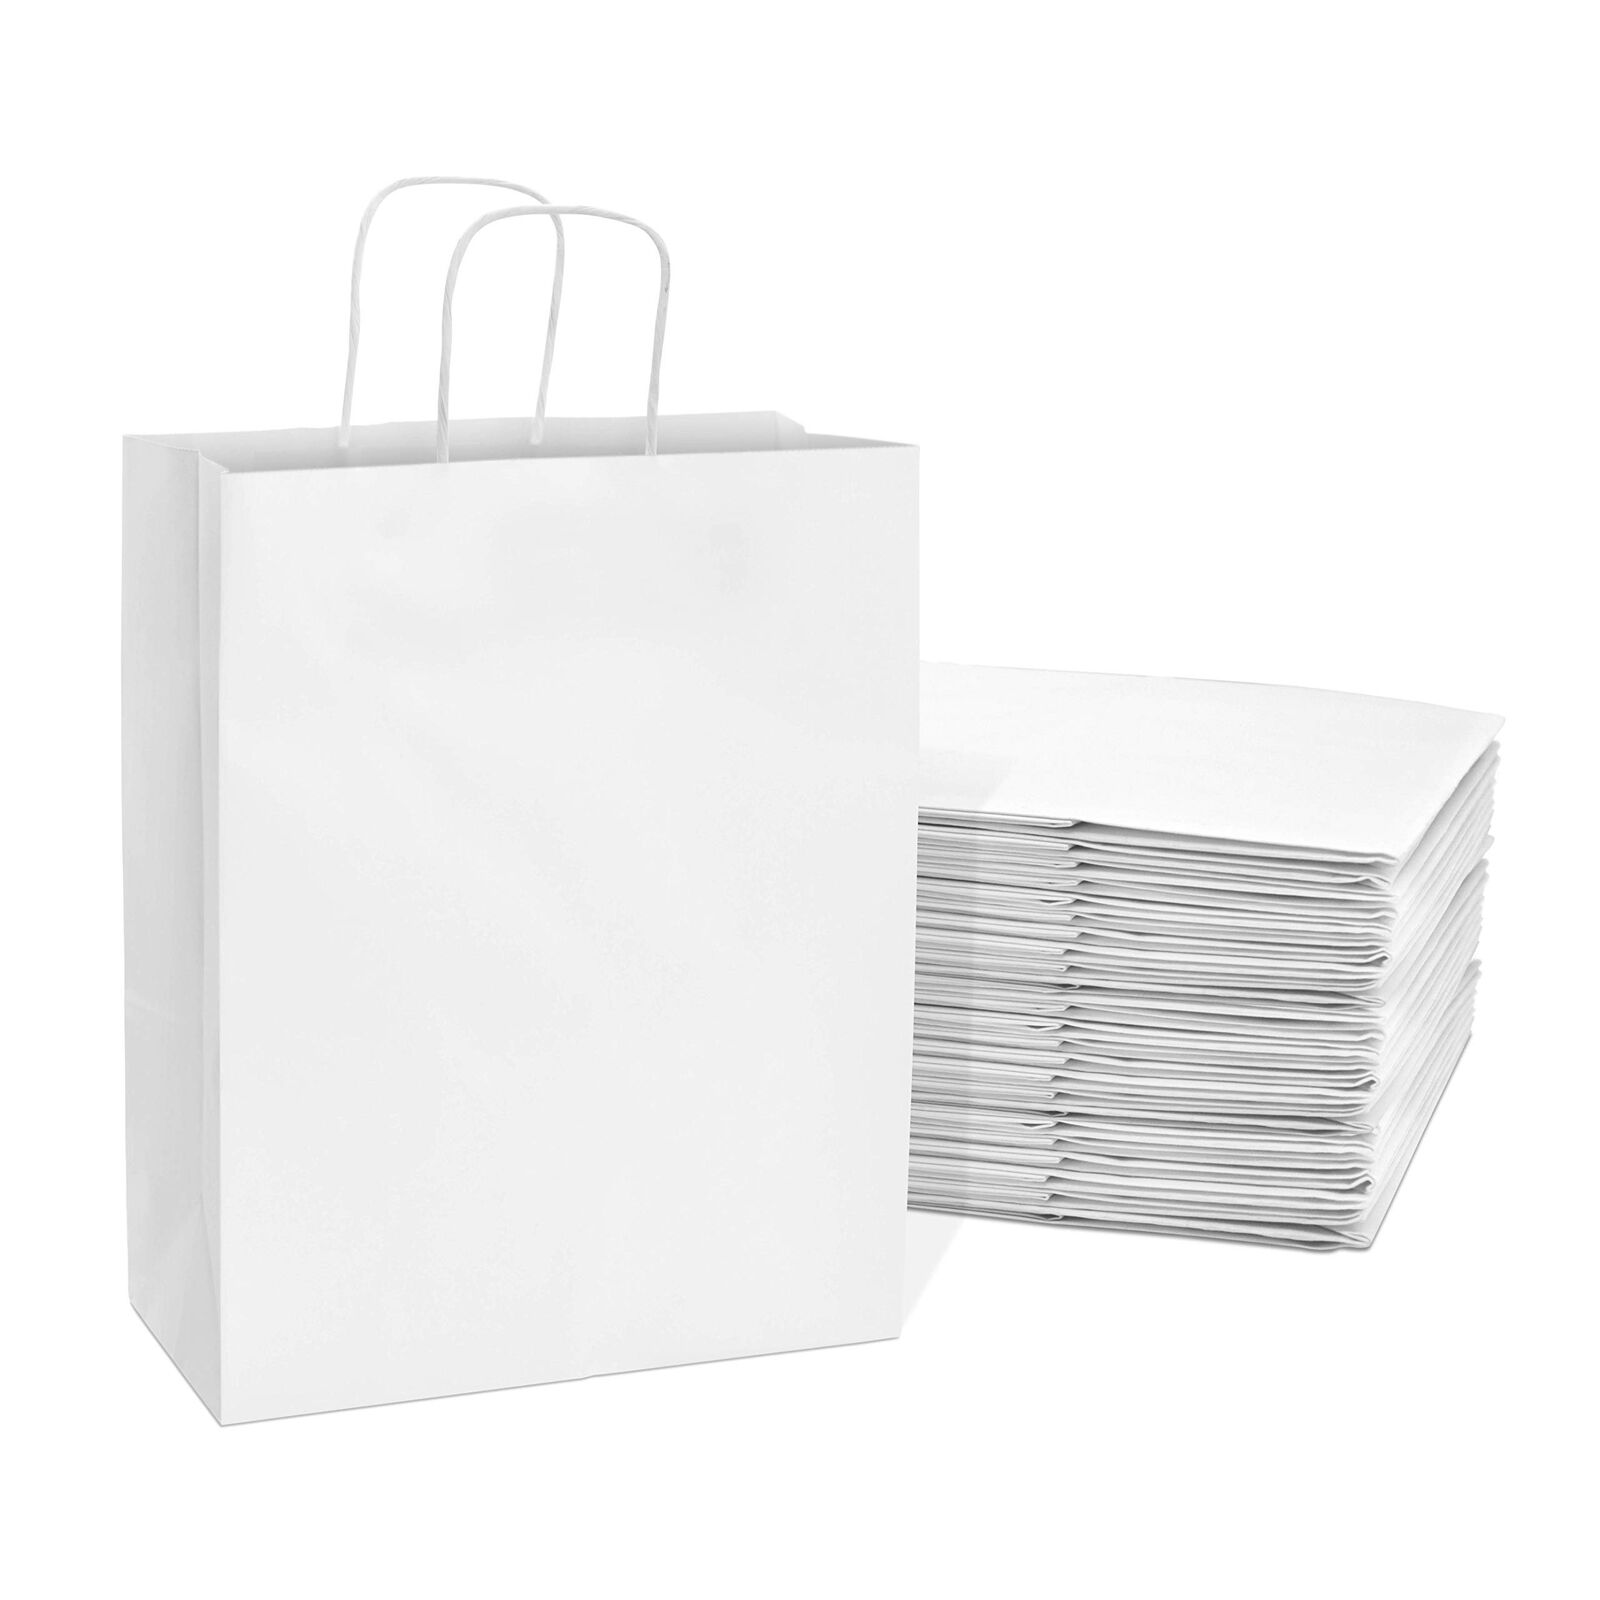 Prime Line Packaging 10x5x13 50 Pack White Gift Bags, Medium Paper Bags with...